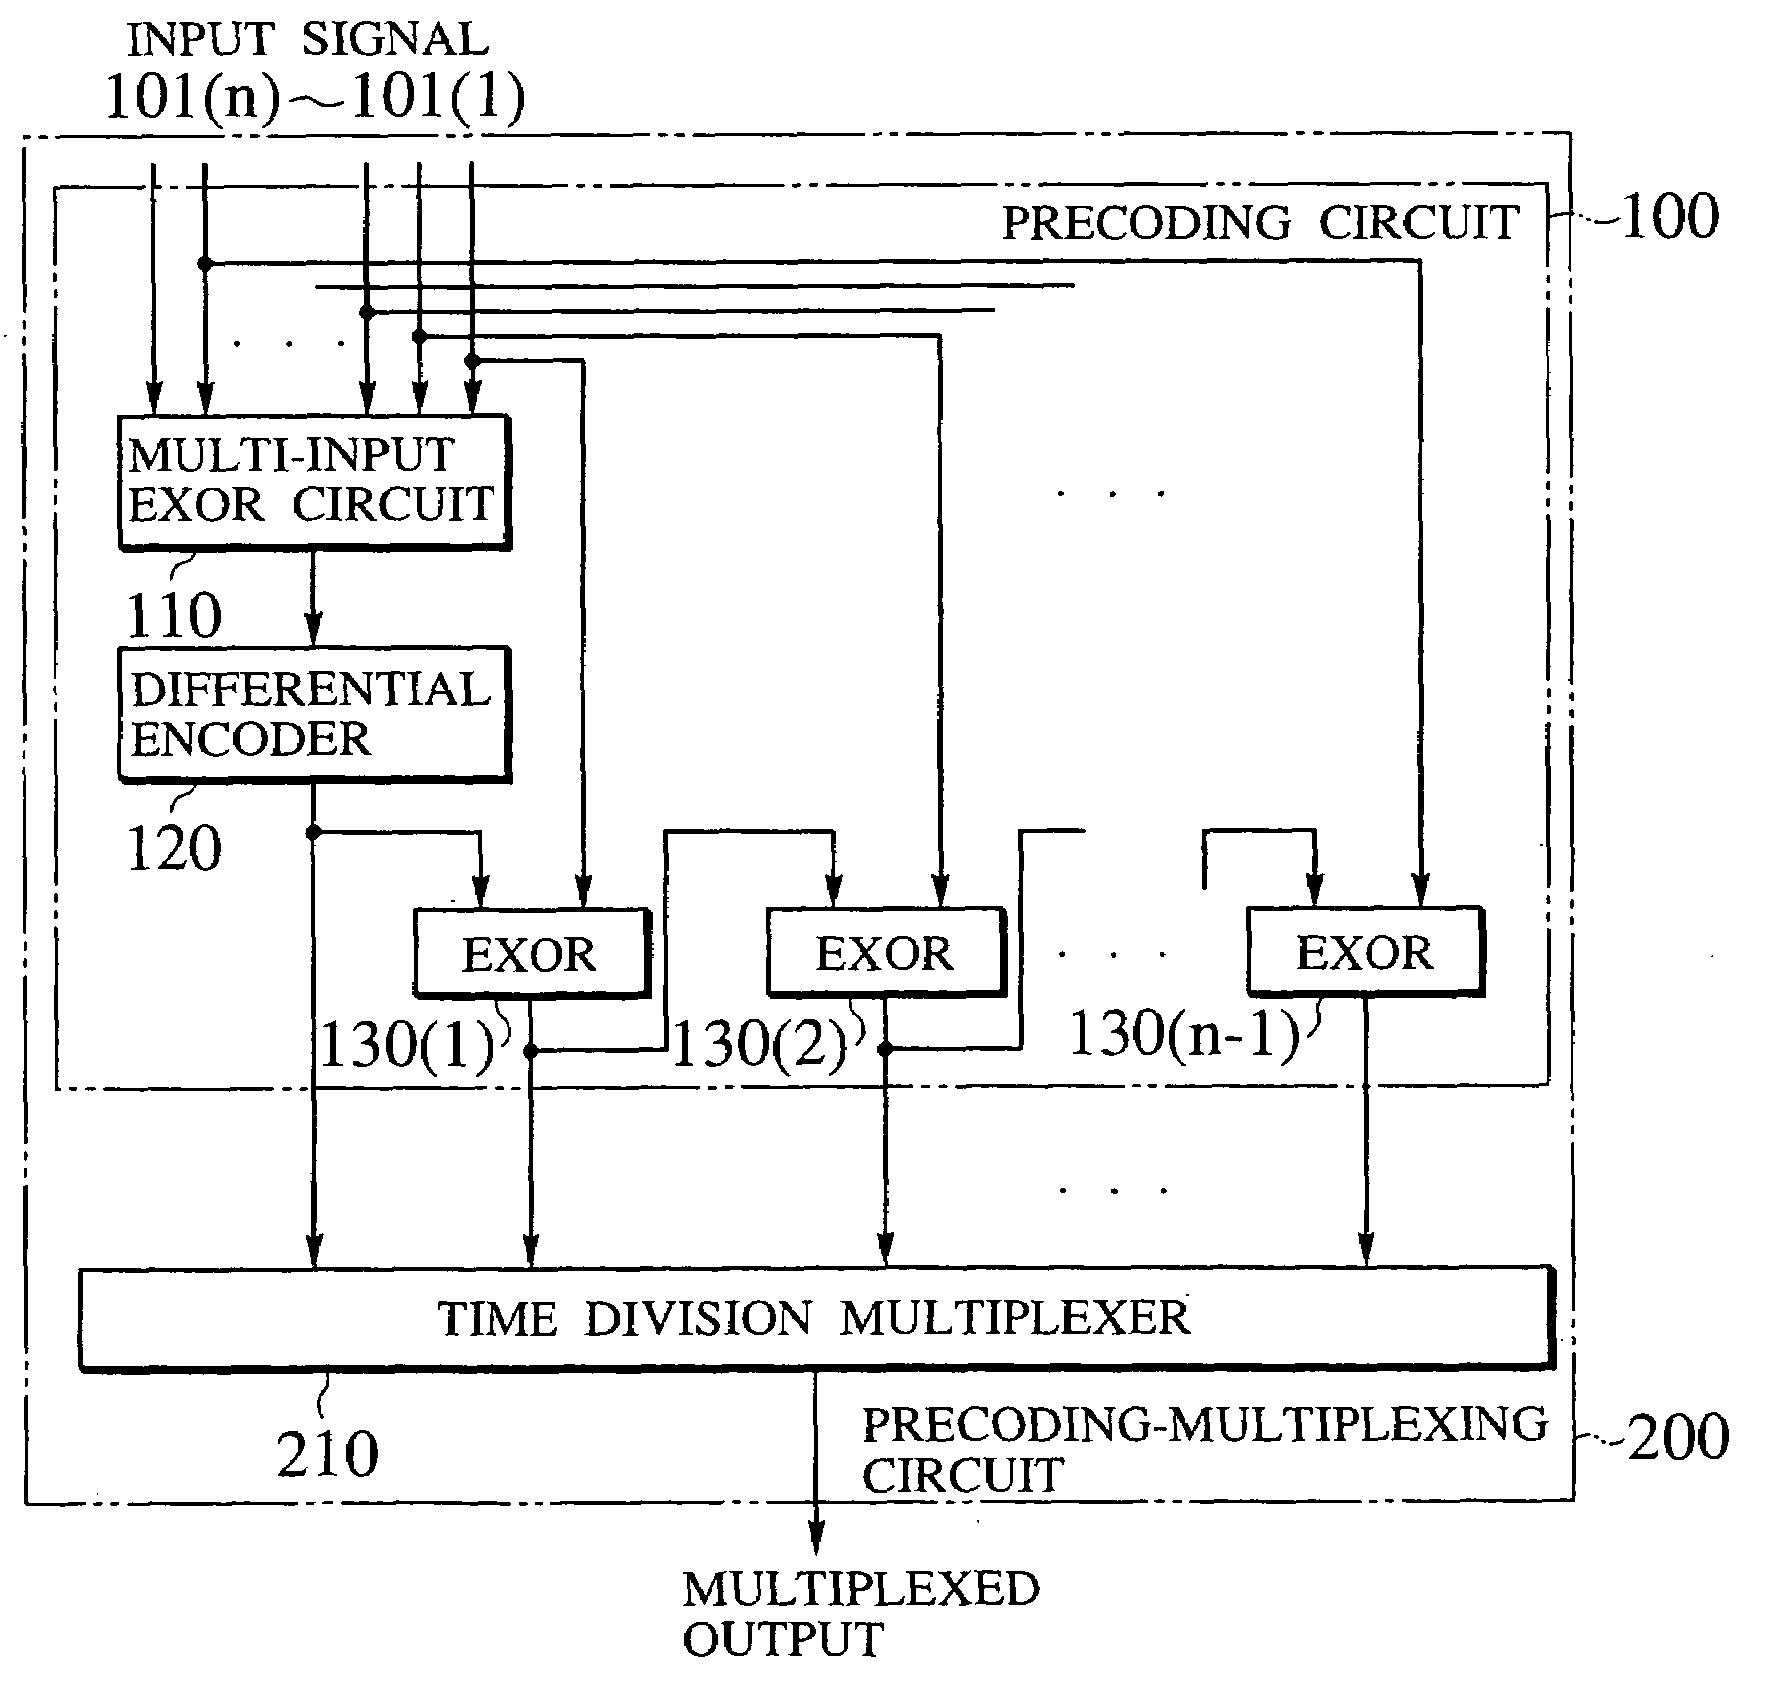 Precoding circuit and precoding-mulitplexing circuit for realizing very high transmission rate in optical fiber communication